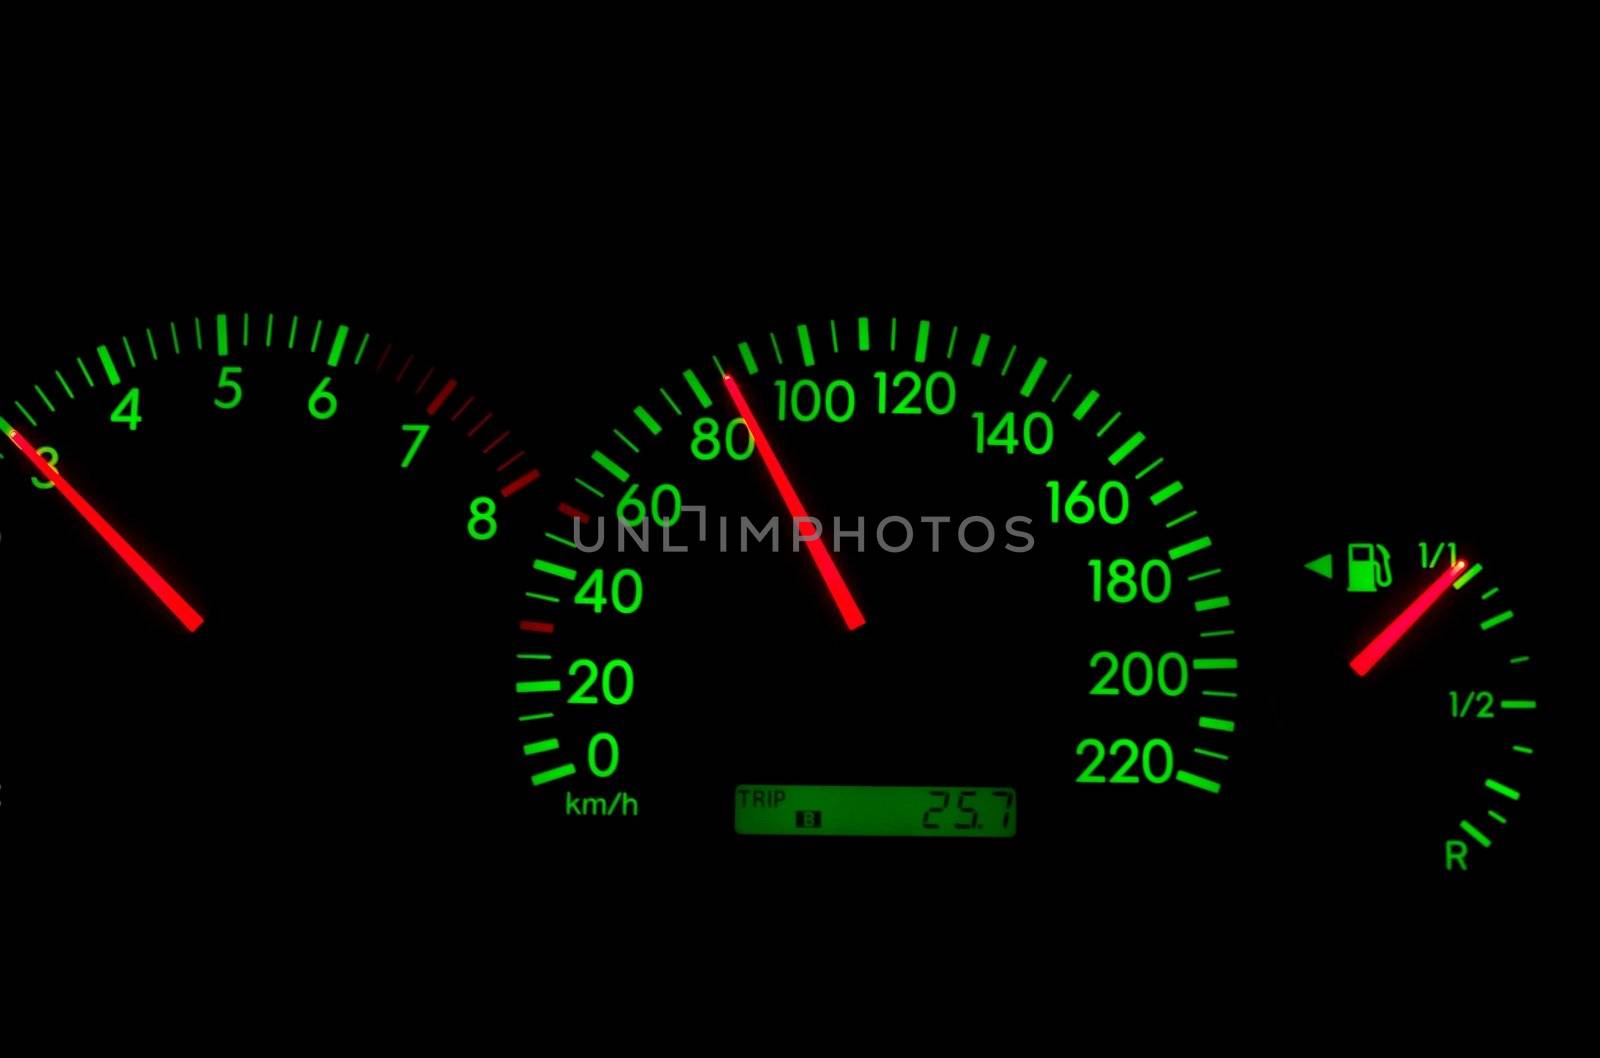 Speedometer of a car showing 85